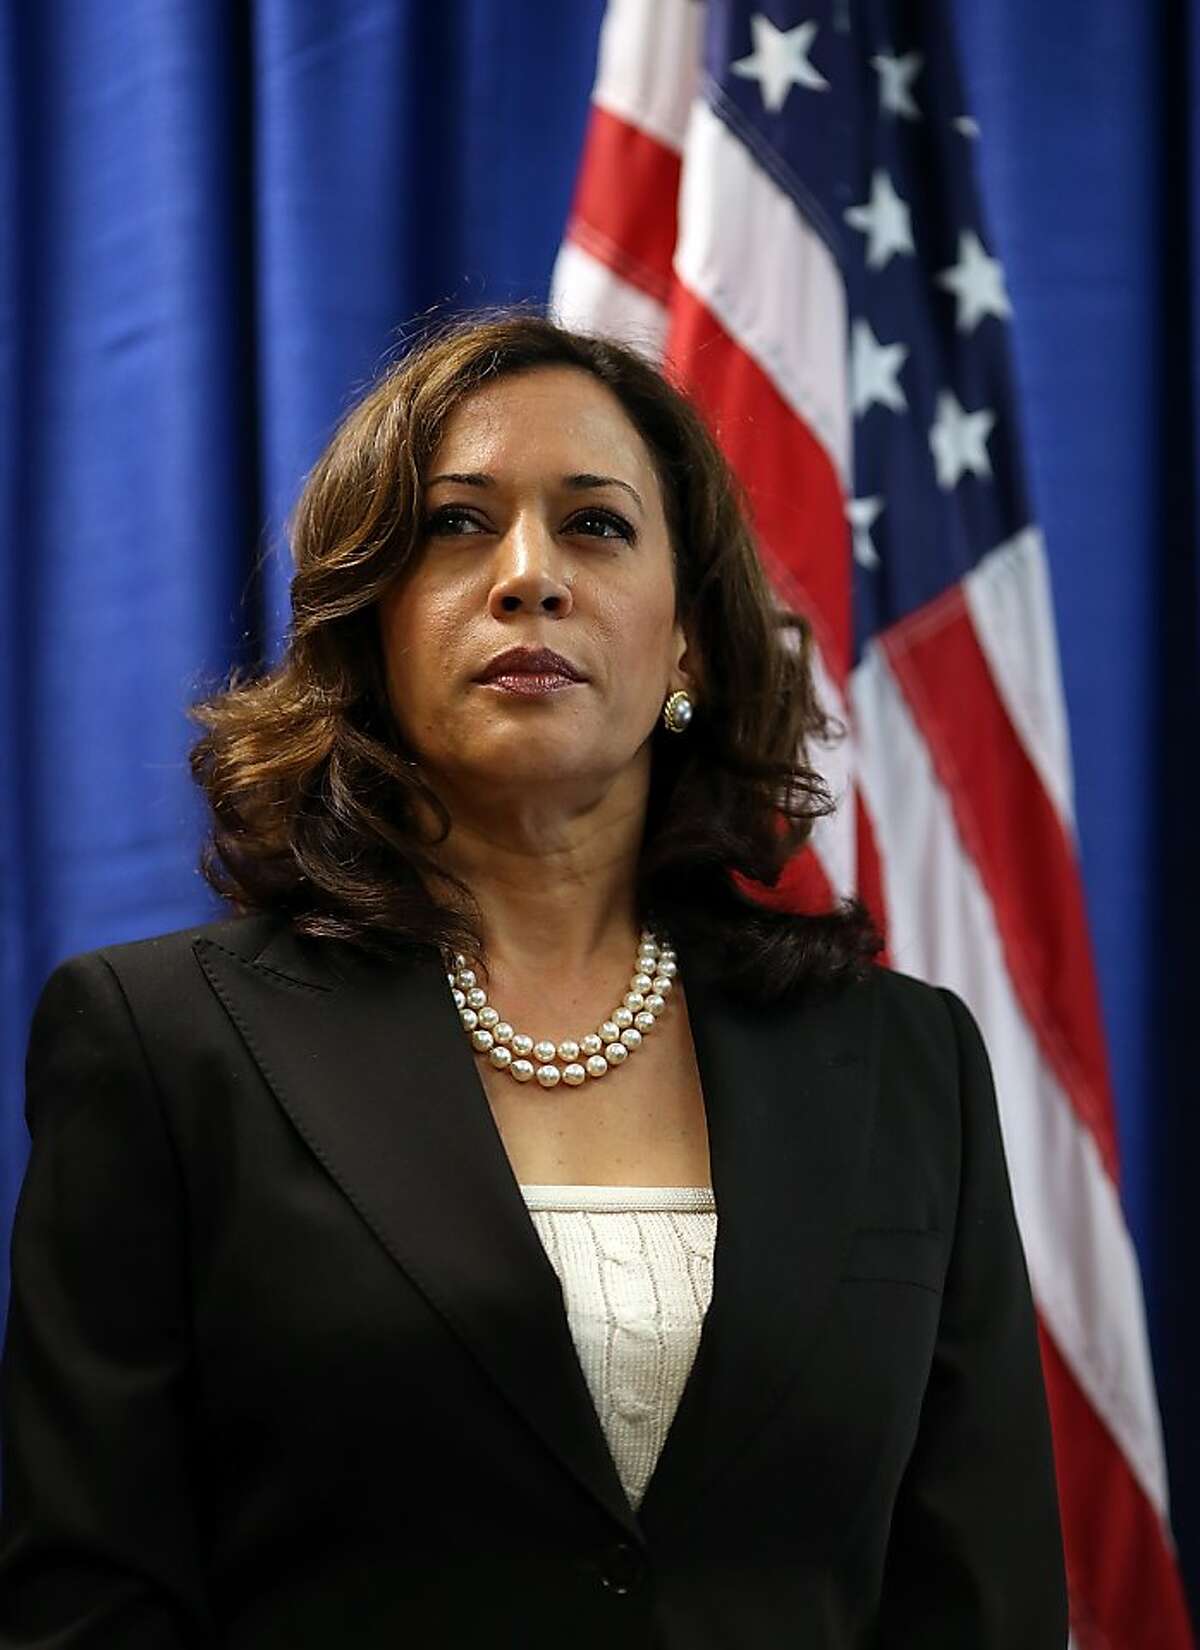 California Attorney General Kamala Harris looks on after California Governor Jerry Brown signed the California Homeowner Bill of Rights (AB 278 and SB 900) on July 11, 2012 in San Francisco, California. Gov. Jerry Brown signed the California Homeowners Bill of Rights that establishes landmark protection rules for mortgage loan borrowers. The laws go into effect on January 1, 2013. (Photo by Justin Sullivan/Getty Images)